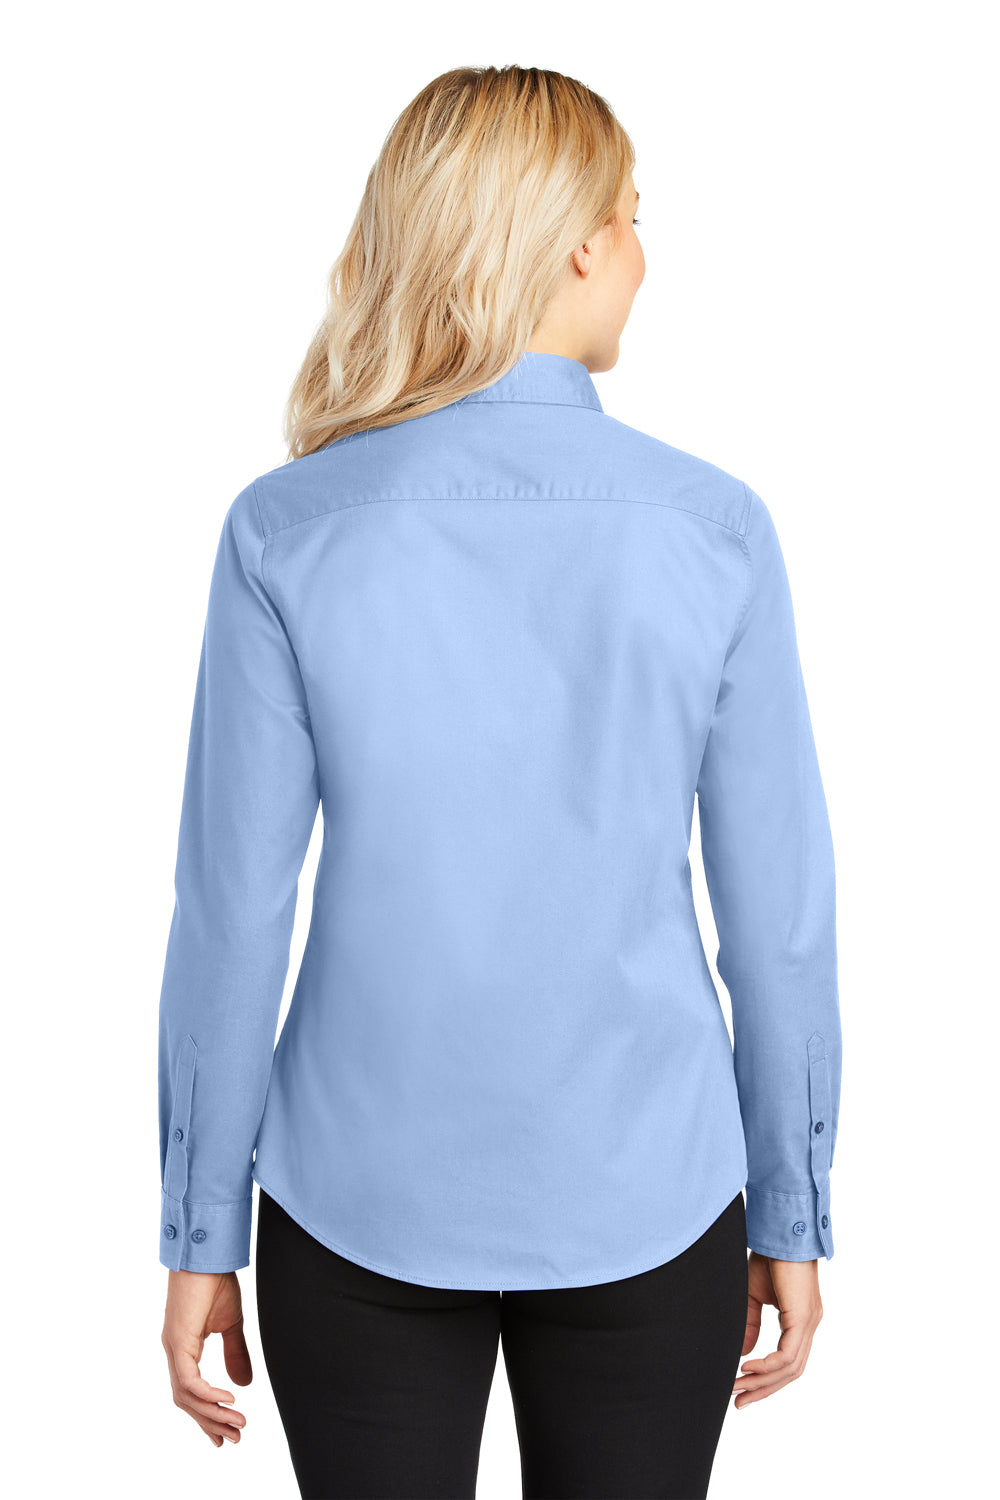 Port Authority L608 Womens Easy Care Wrinkle Resistant Long Sleeve Button Down Shirt Light Blue Back